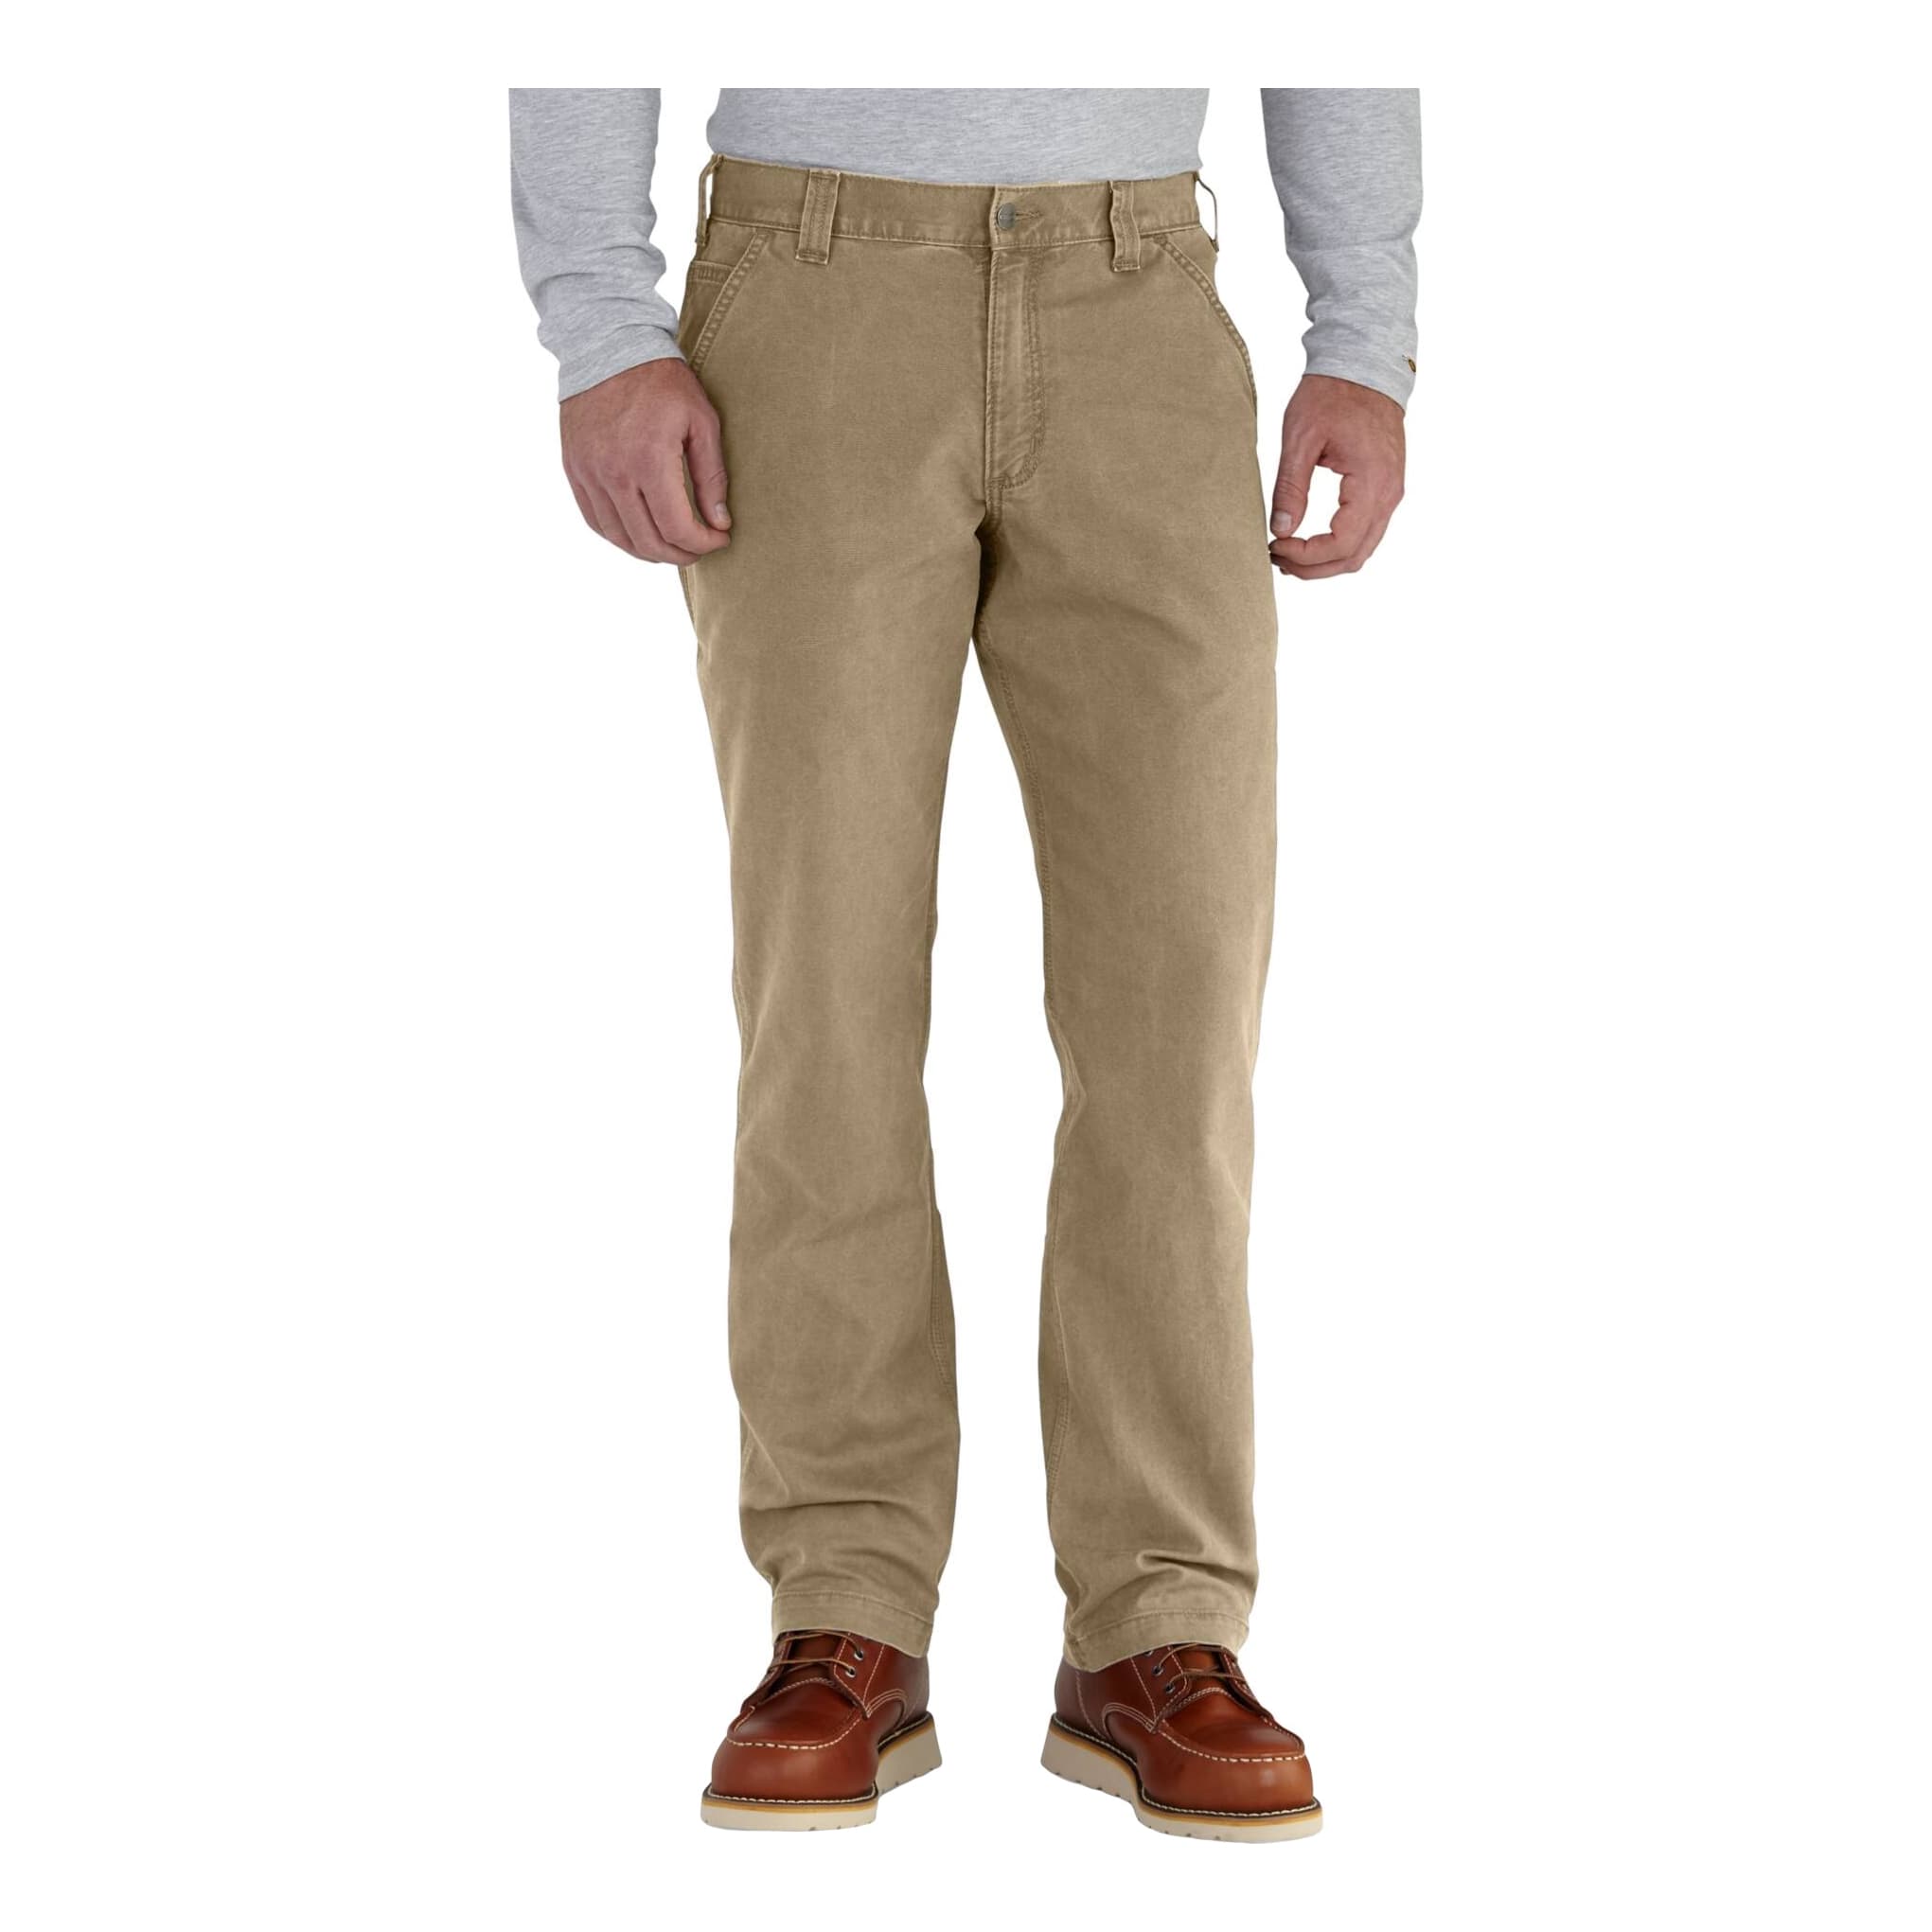 Carhartt Women's Mid Rise Relaxed Fit Canvas Work Pants